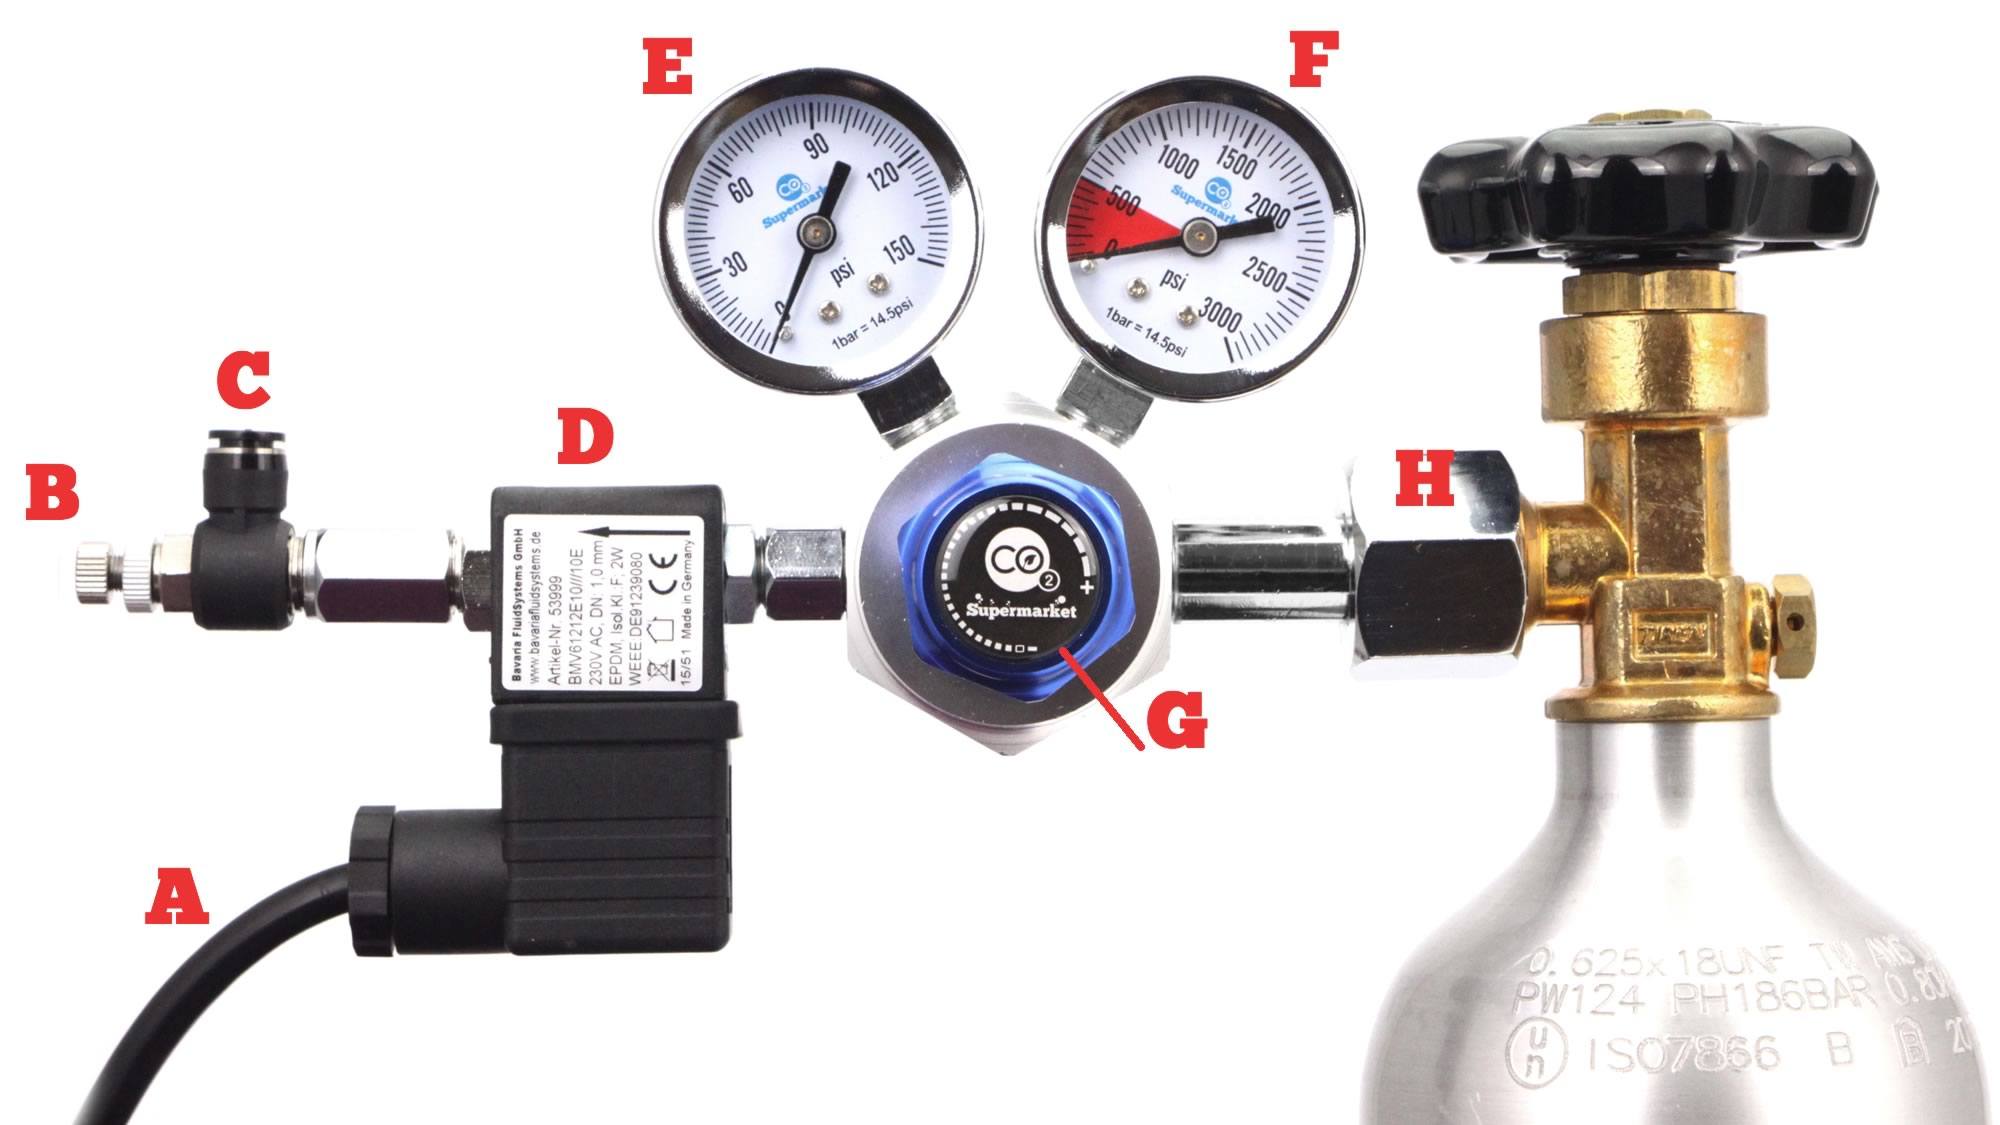 Dual stage CO2 regulator layout